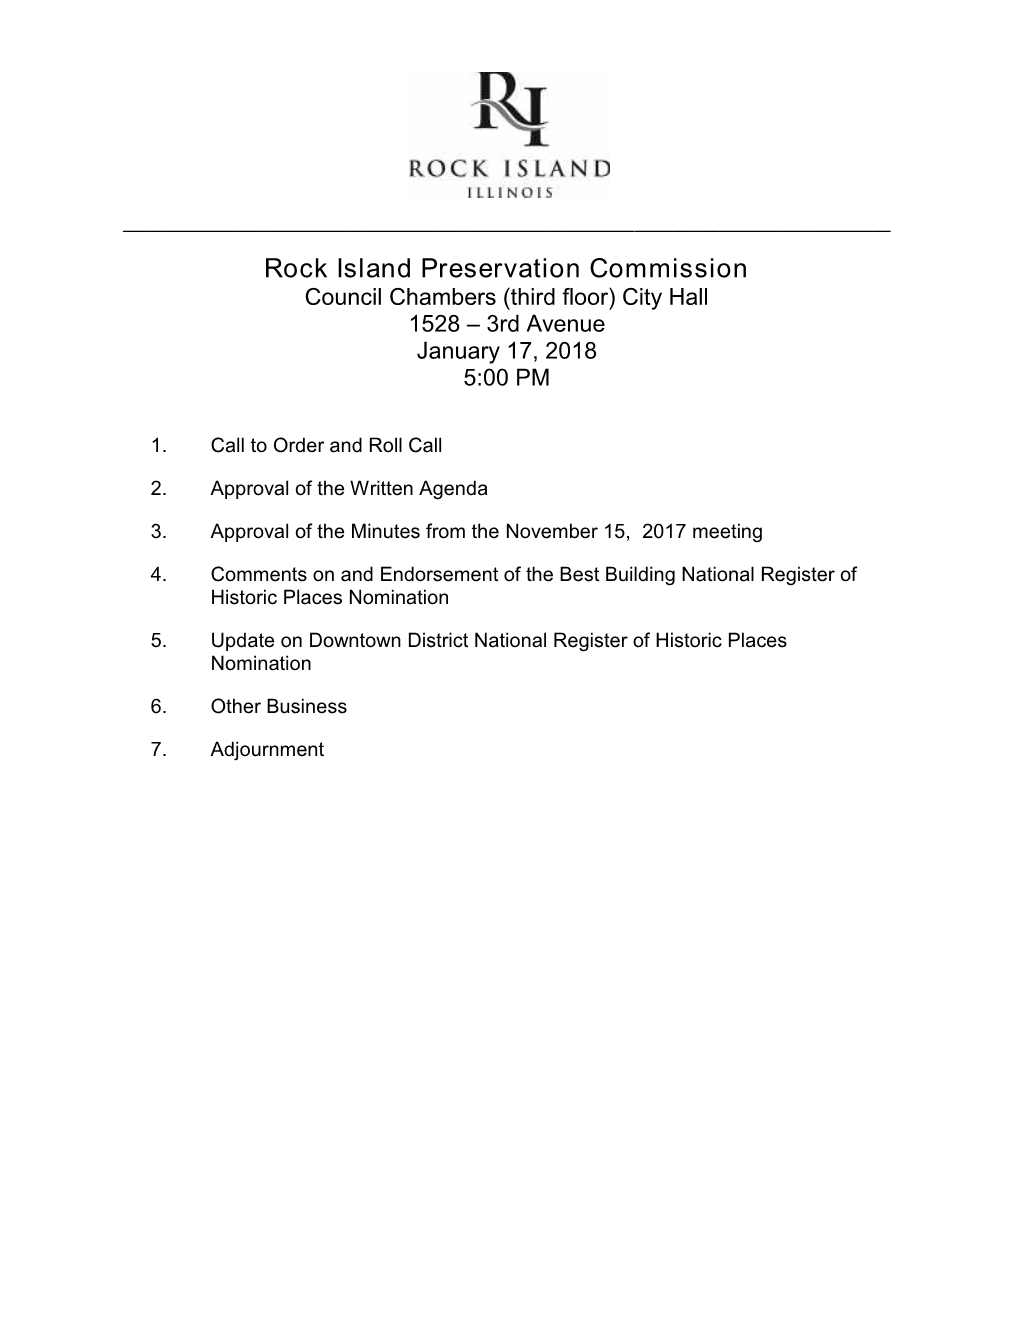 Rock Island Preservation Commission Council Chambers (Third Floor) City Hall 1528 – 3Rd Avenue January 17, 2018 5:00 PM